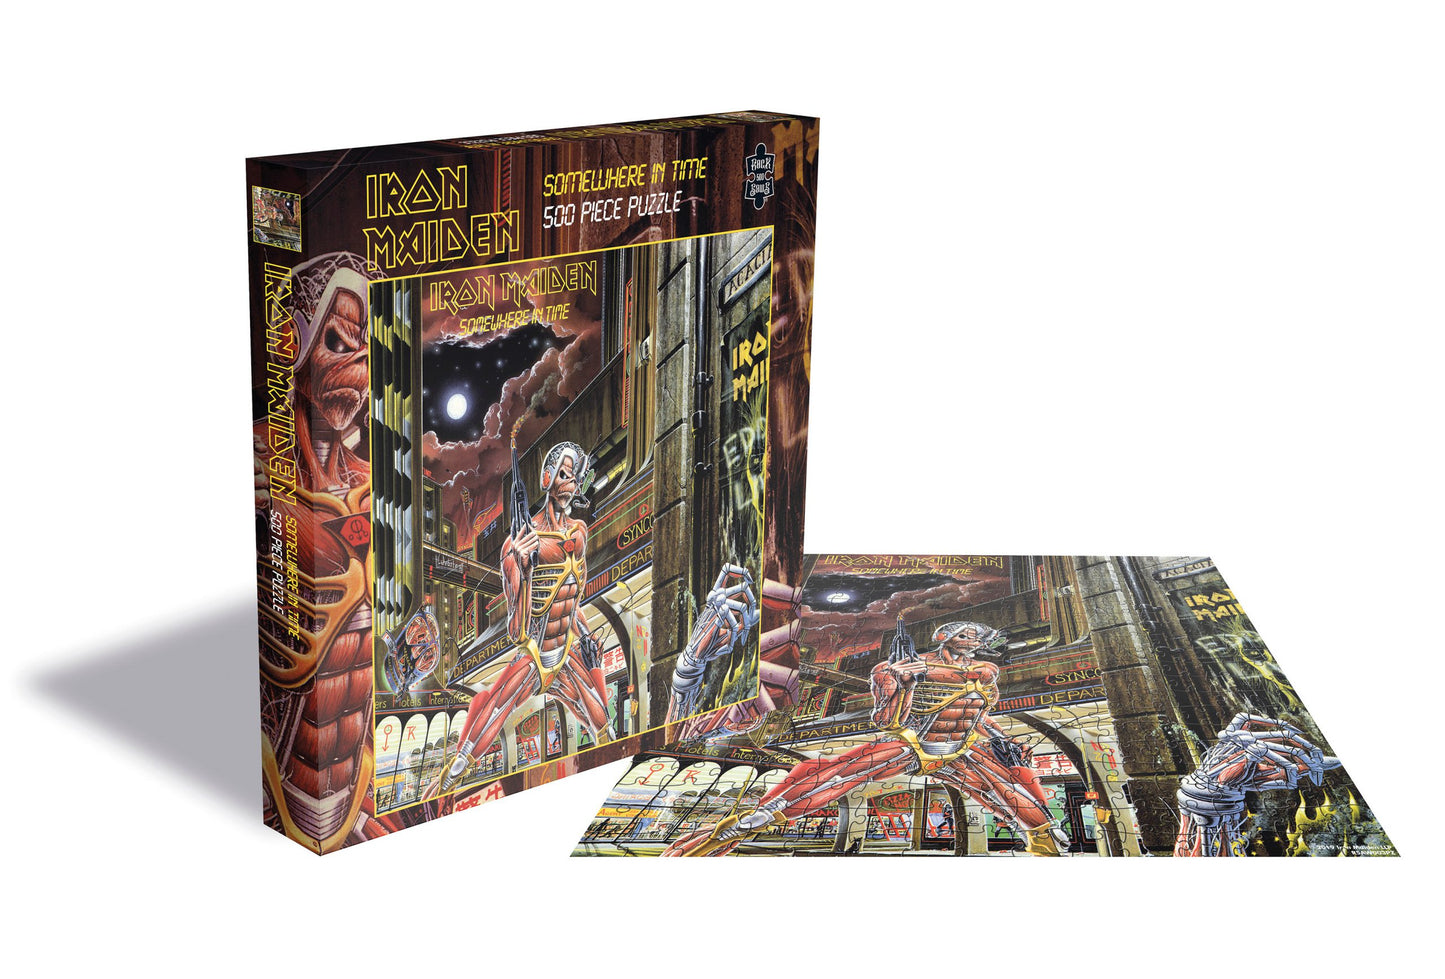 Iron Maiden - Somewhere in Time, 500 Piece Puzzle